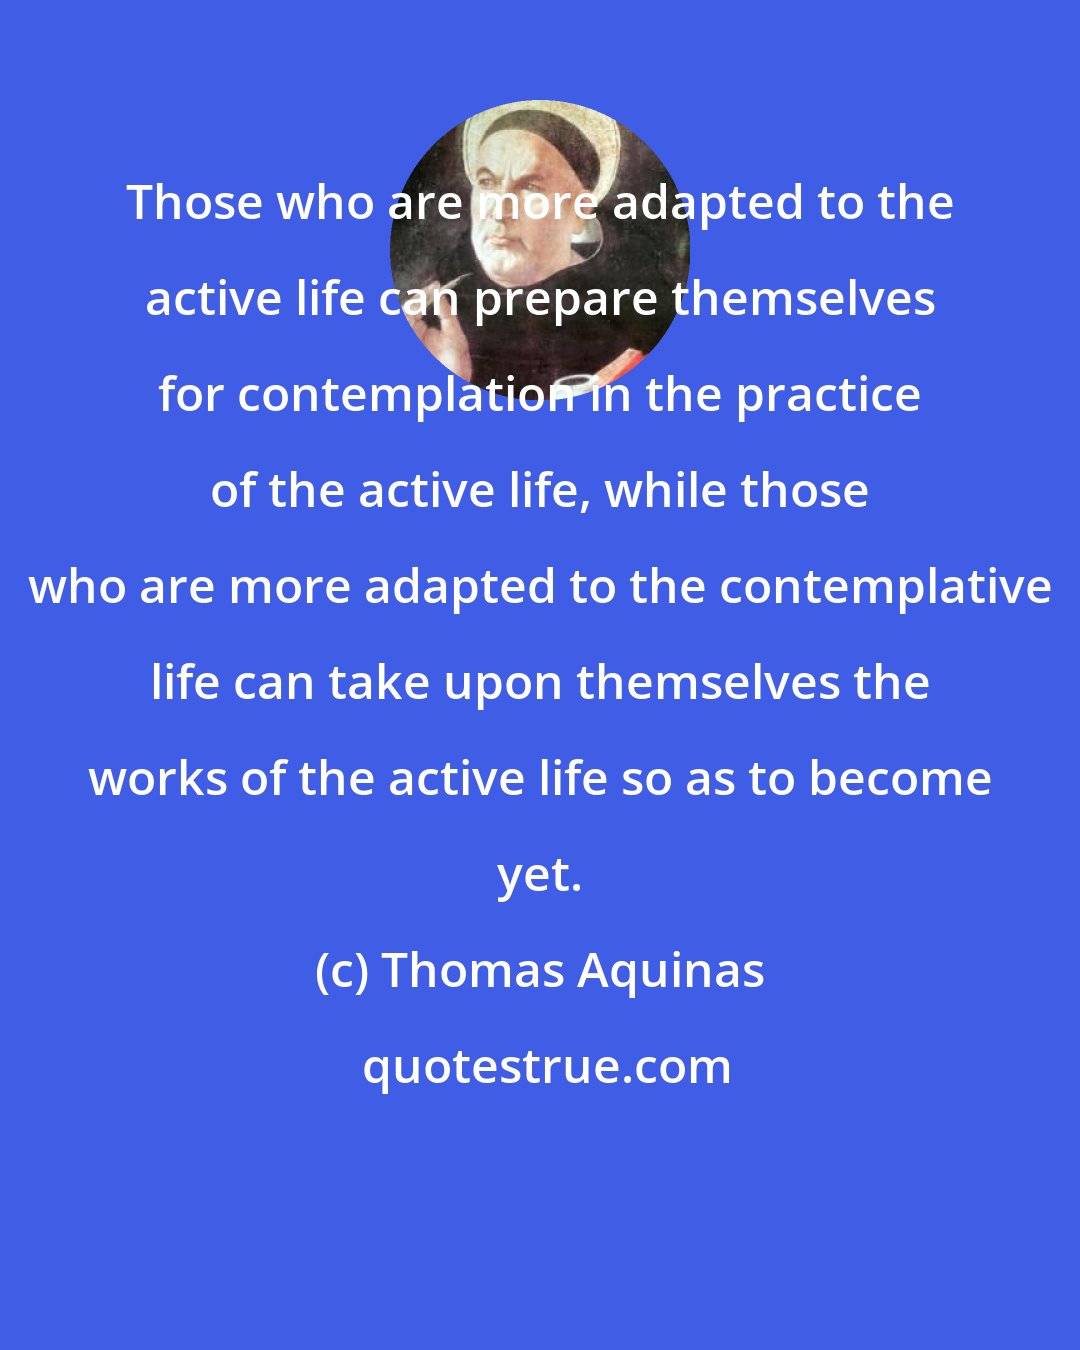 Thomas Aquinas: Those who are more adapted to the active life can prepare themselves for contemplation in the practice of the active life, while those who are more adapted to the contemplative life can take upon themselves the works of the active life so as to become yet.